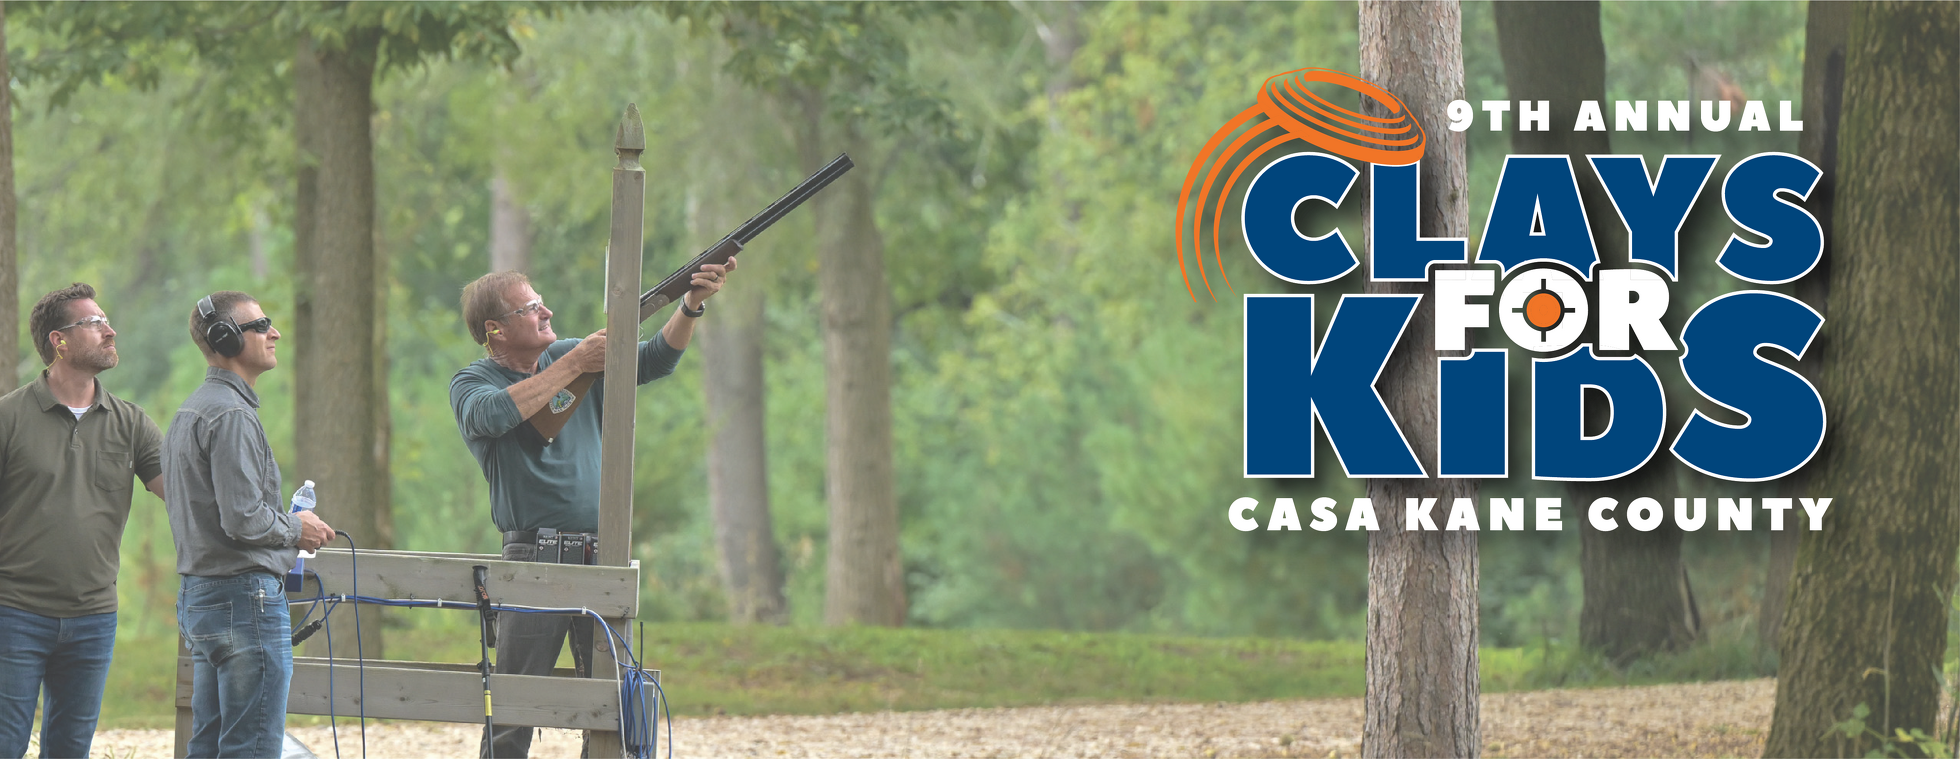 CASA Kane County's Clays for Kids